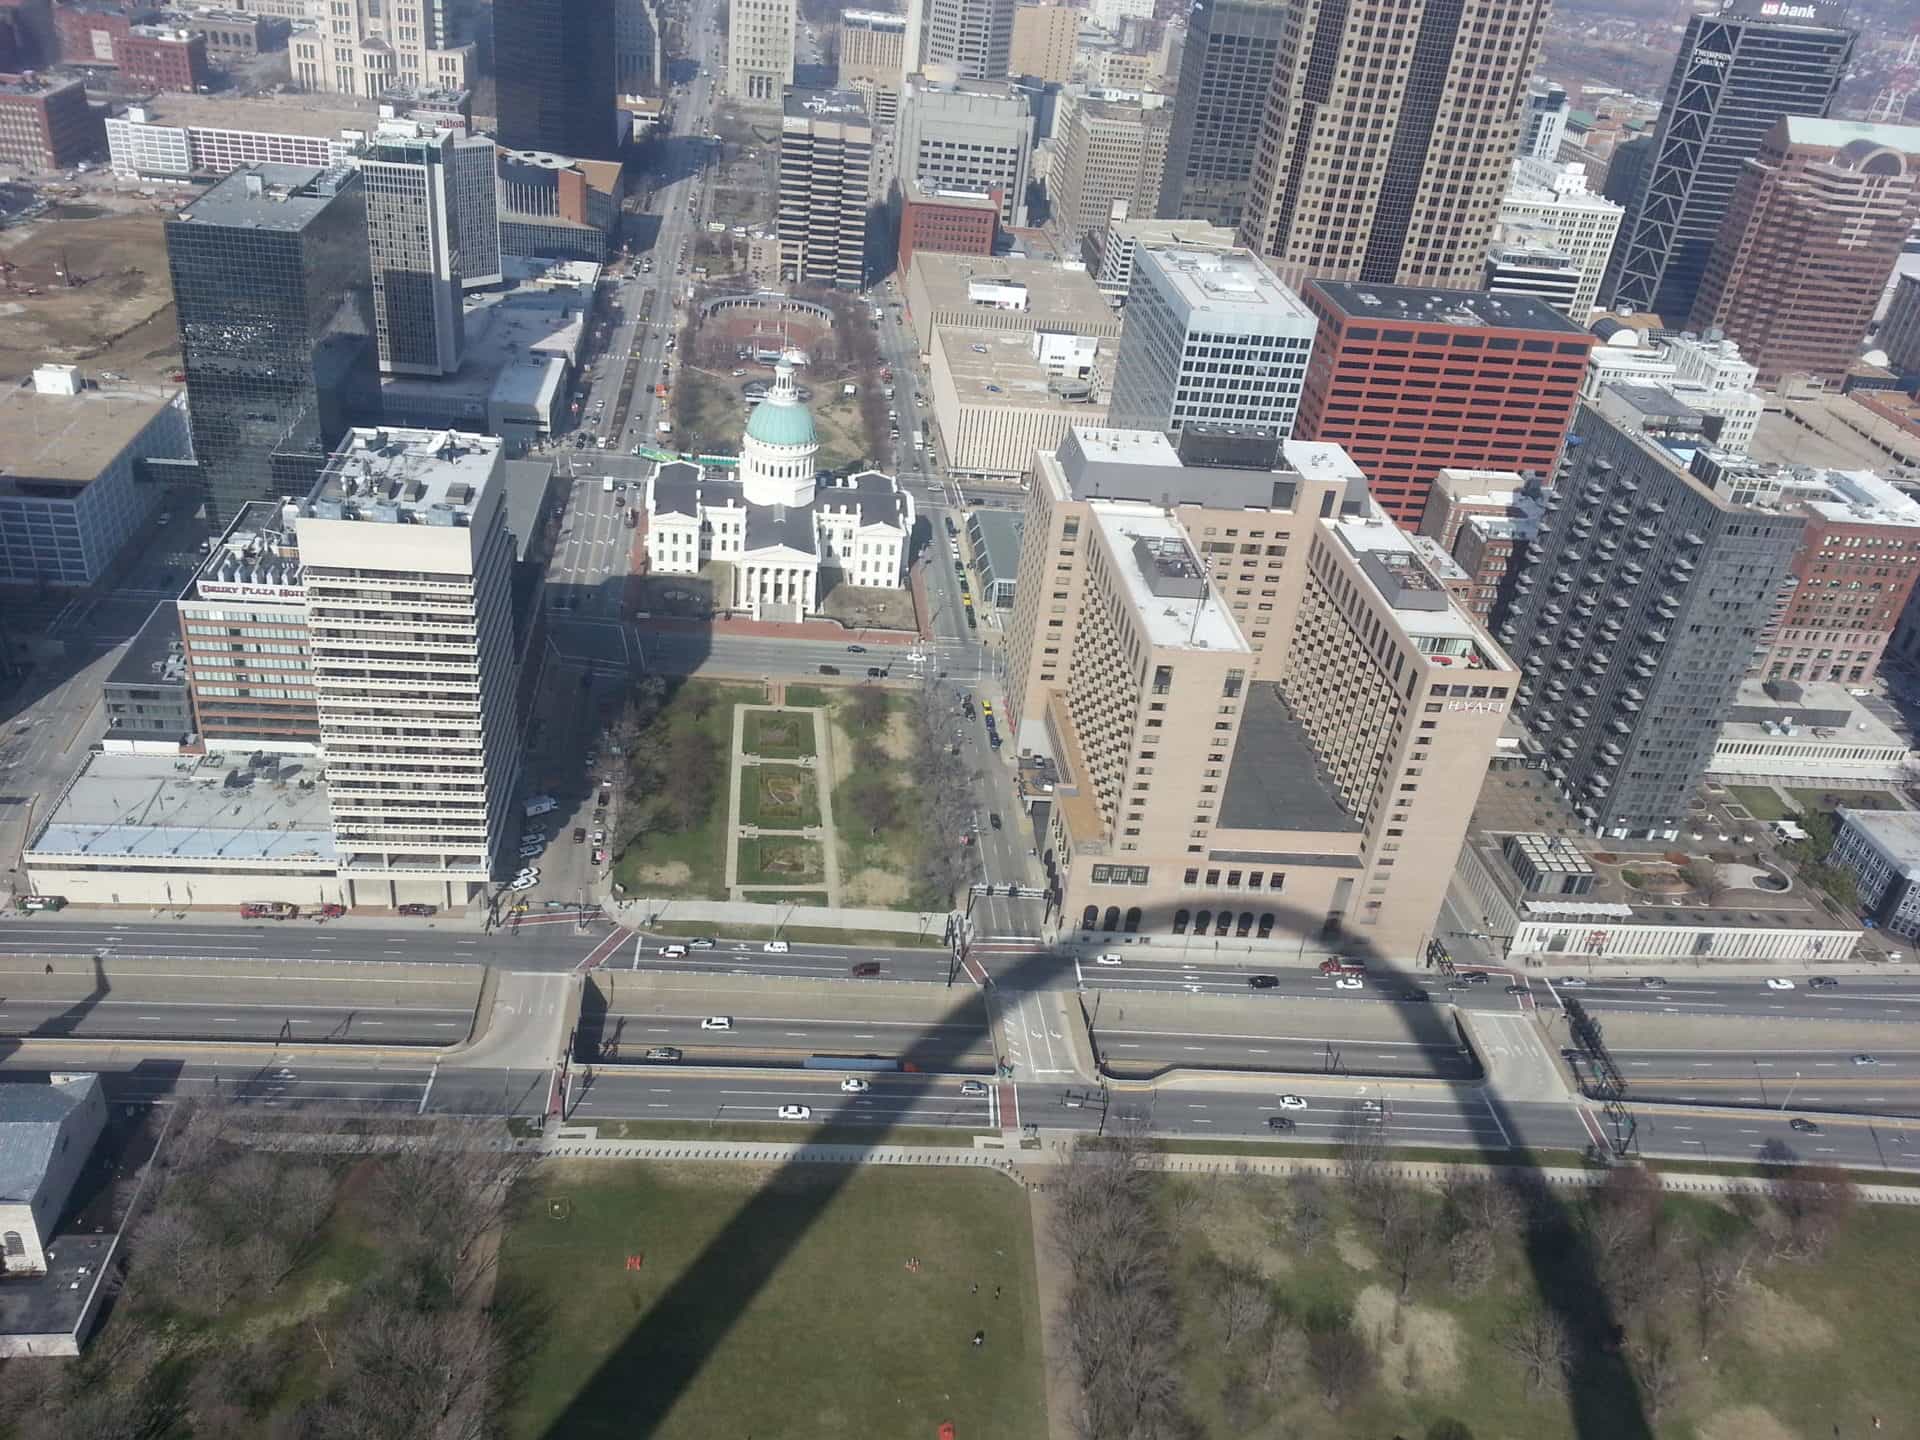 Gateway Arch, St Louis - View from the top of the Arch